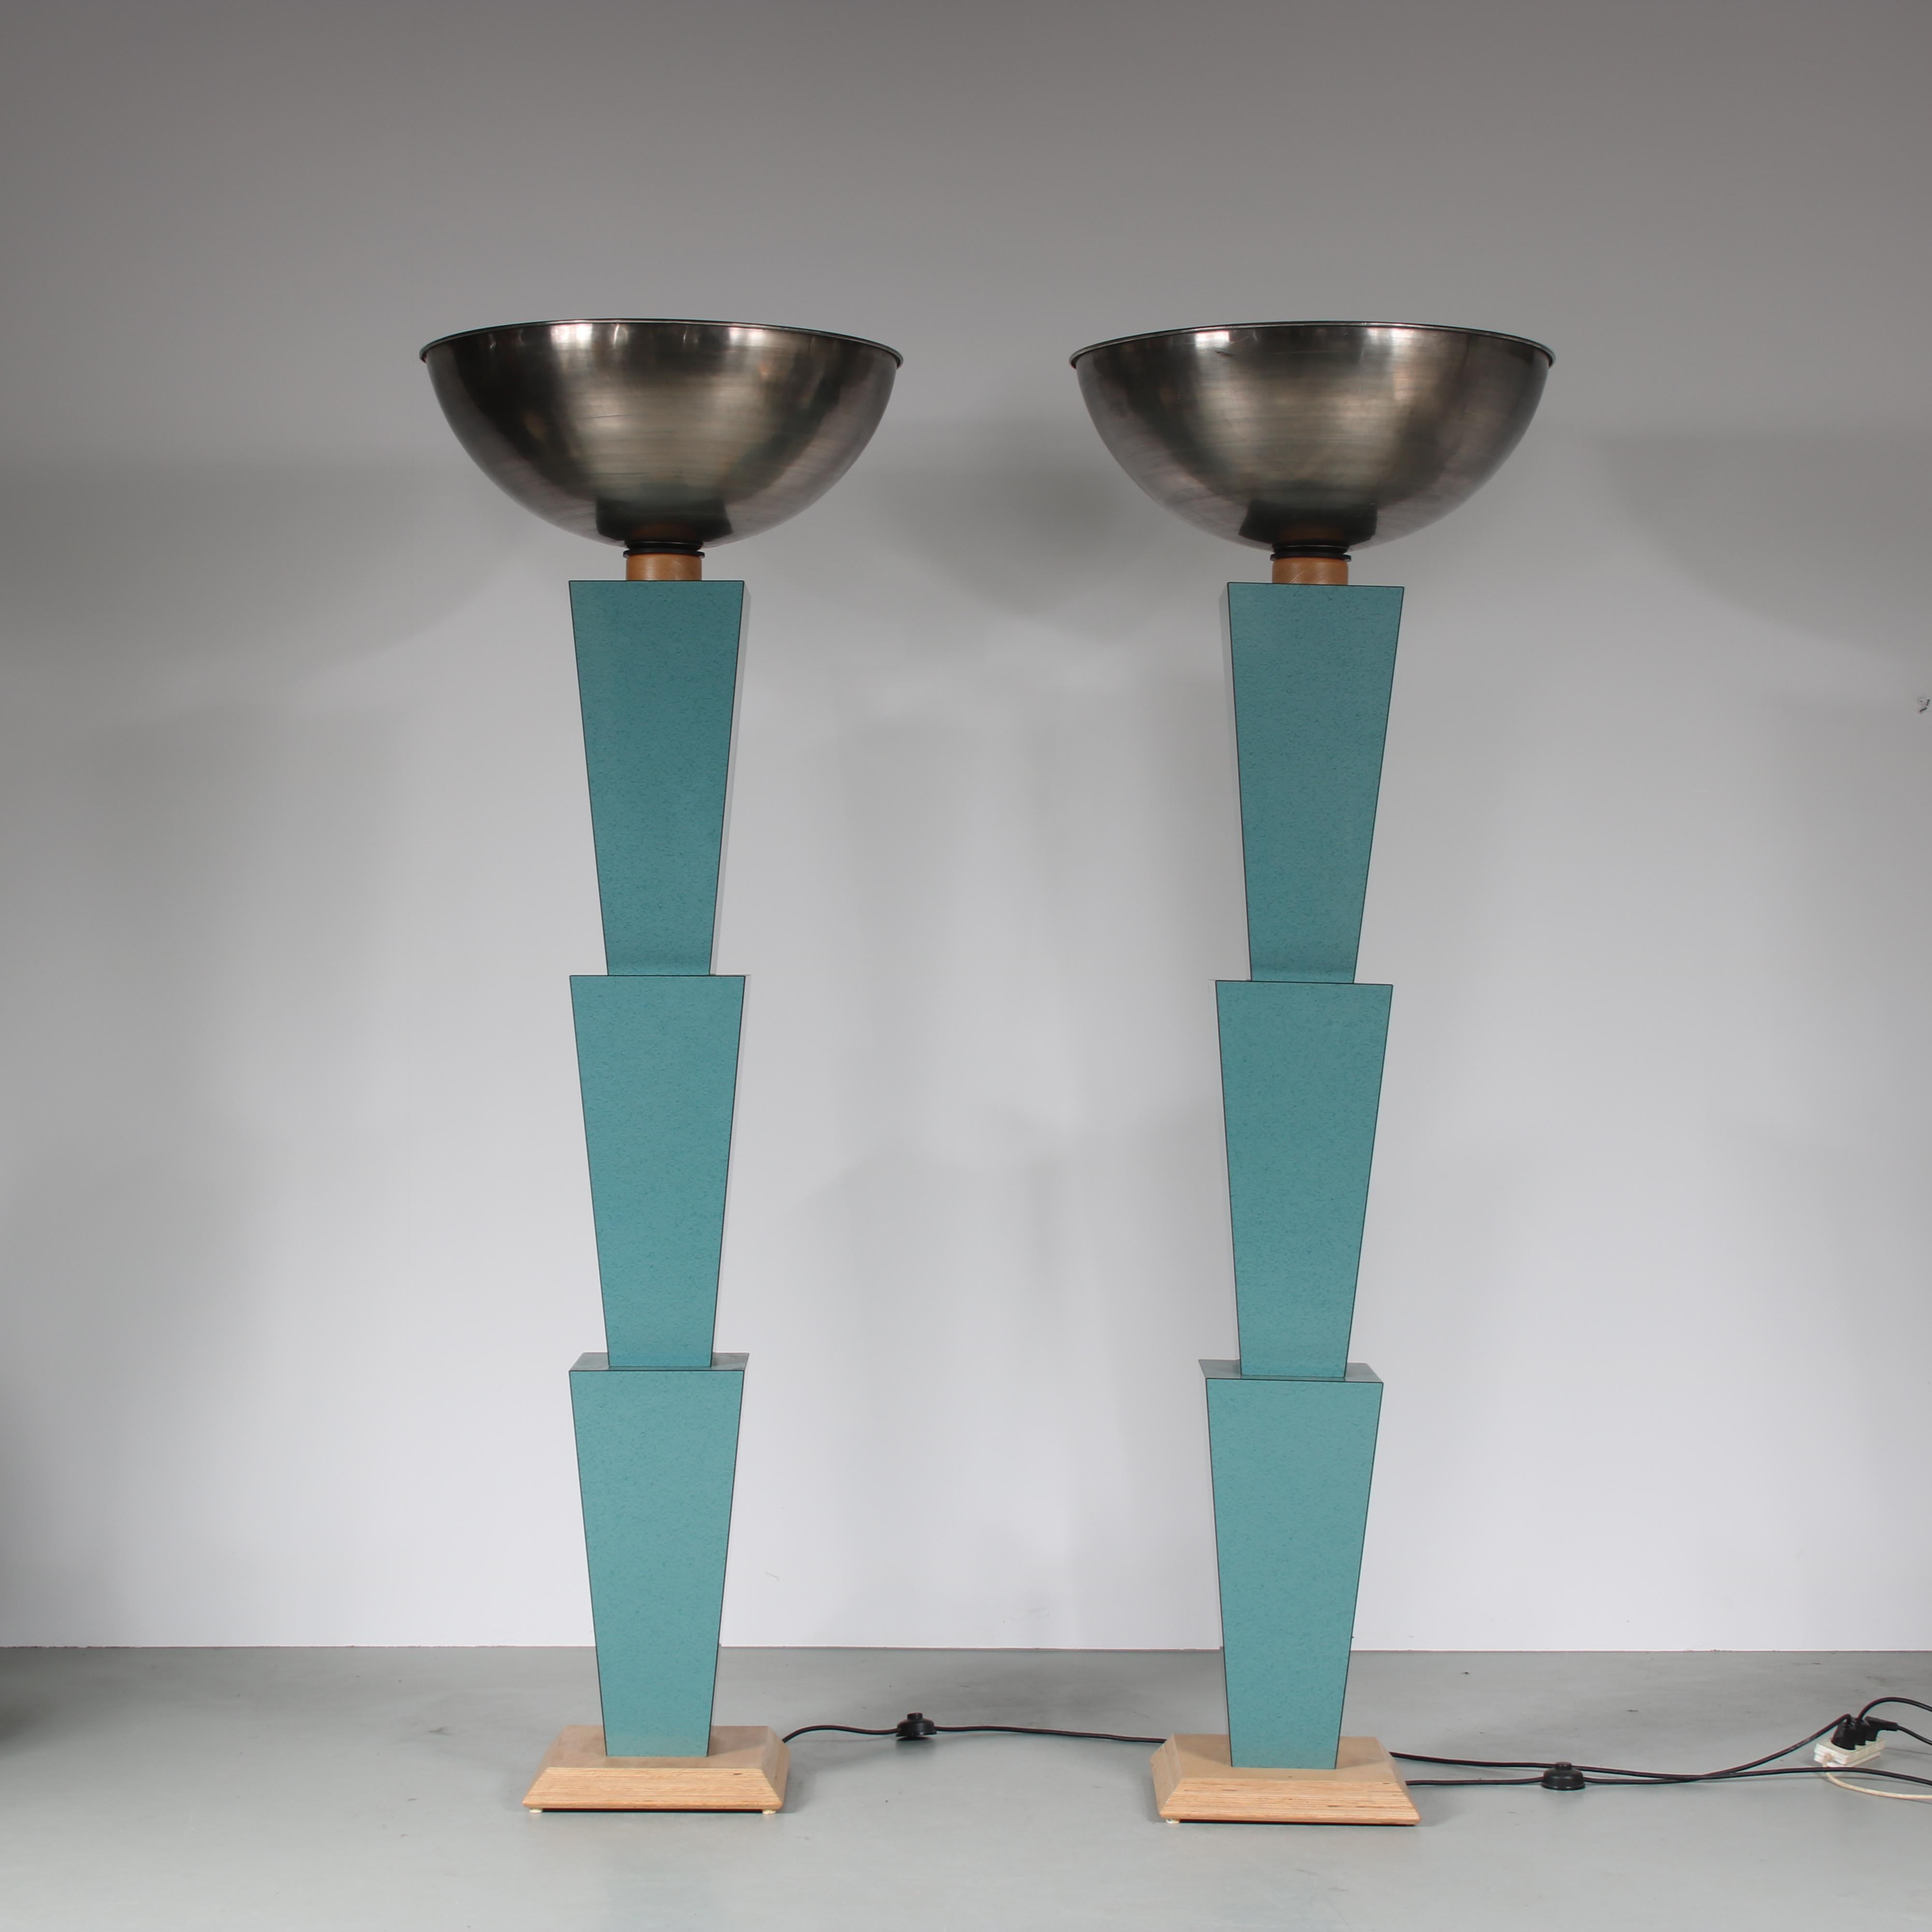 An eye-catching pair of floor lamps in Memphis style, manufactured in Italy around 1980.

These unique lamps are made of wood, mostly green laminated. The base contains of multiple inverted trapezium shaped elements, which gives the pieces their